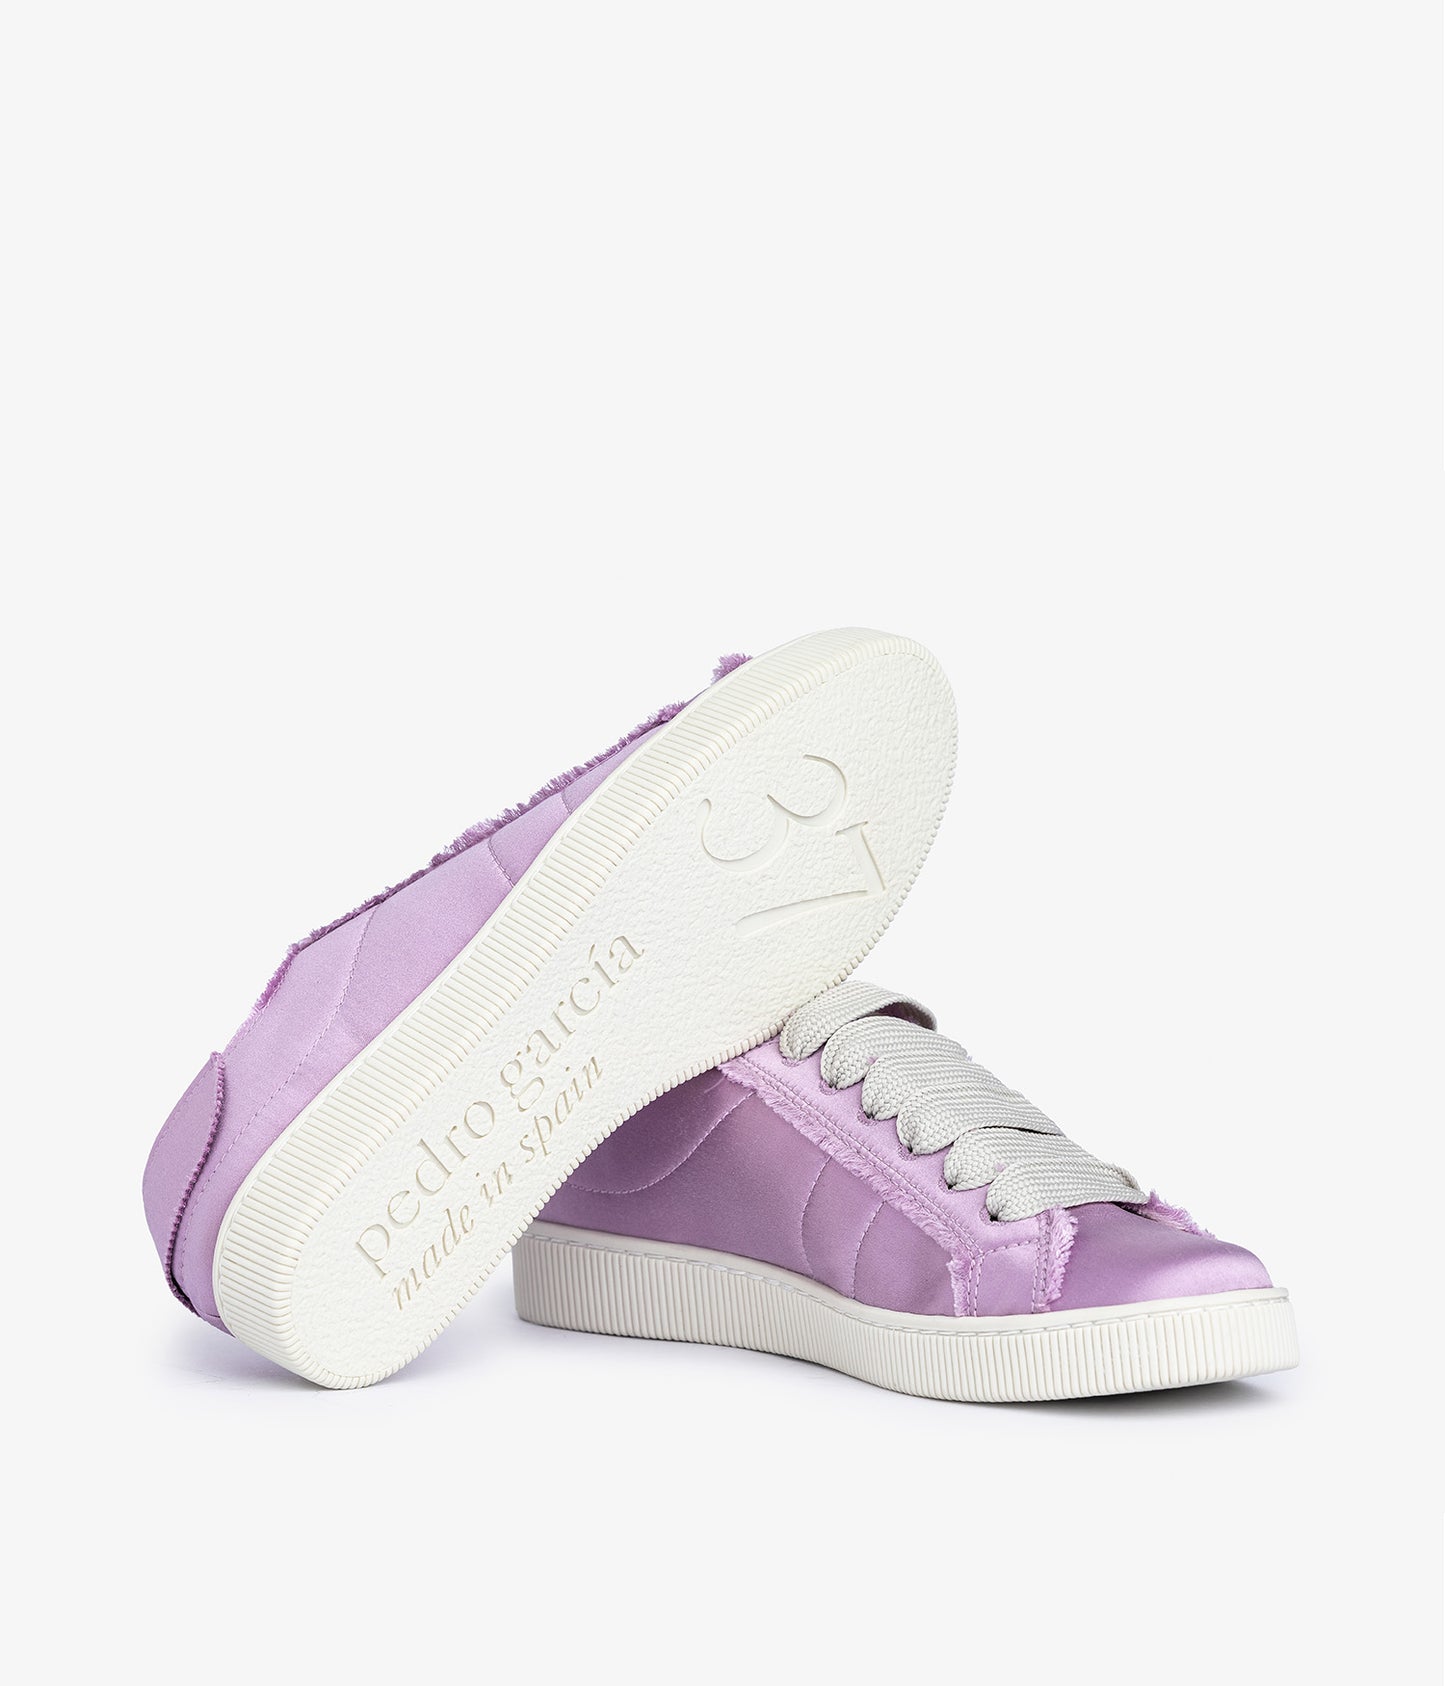 persy / lilac satin